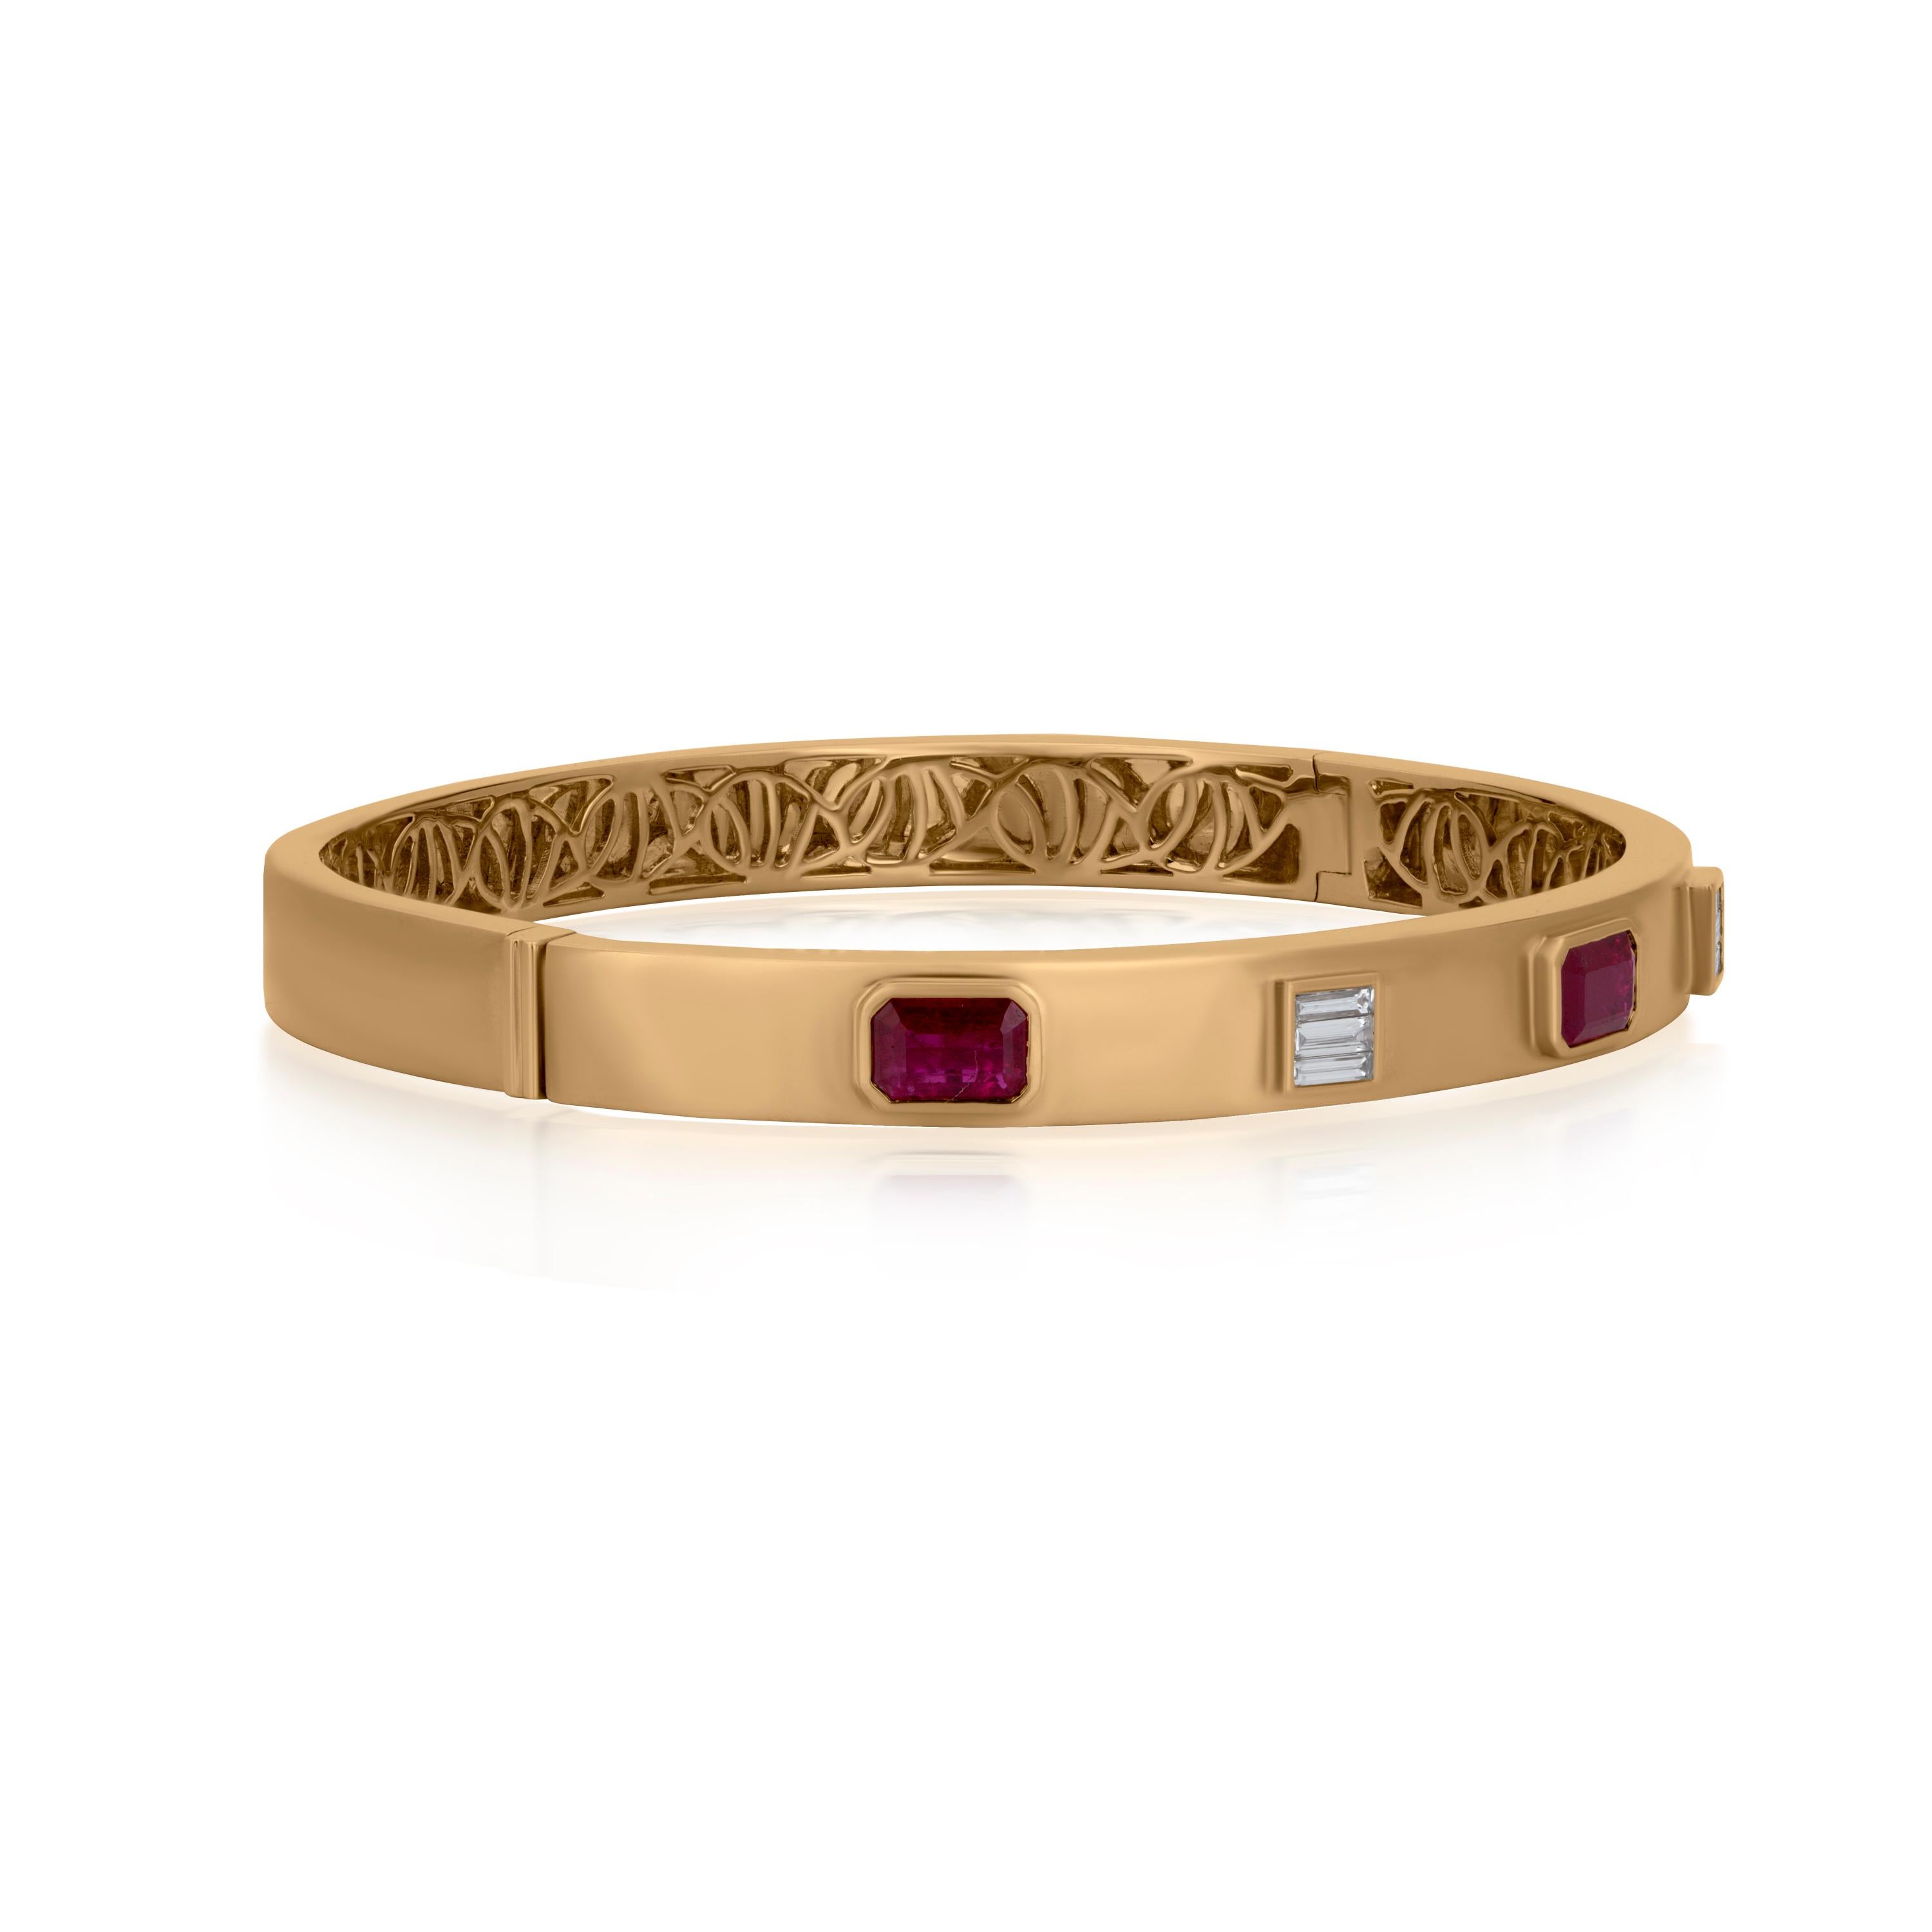 Contemporary Nigaam 1.83 Cts. Ruby and 0.25 Cts. Diamond Bangle Bracelet in 18k Yellow Gold